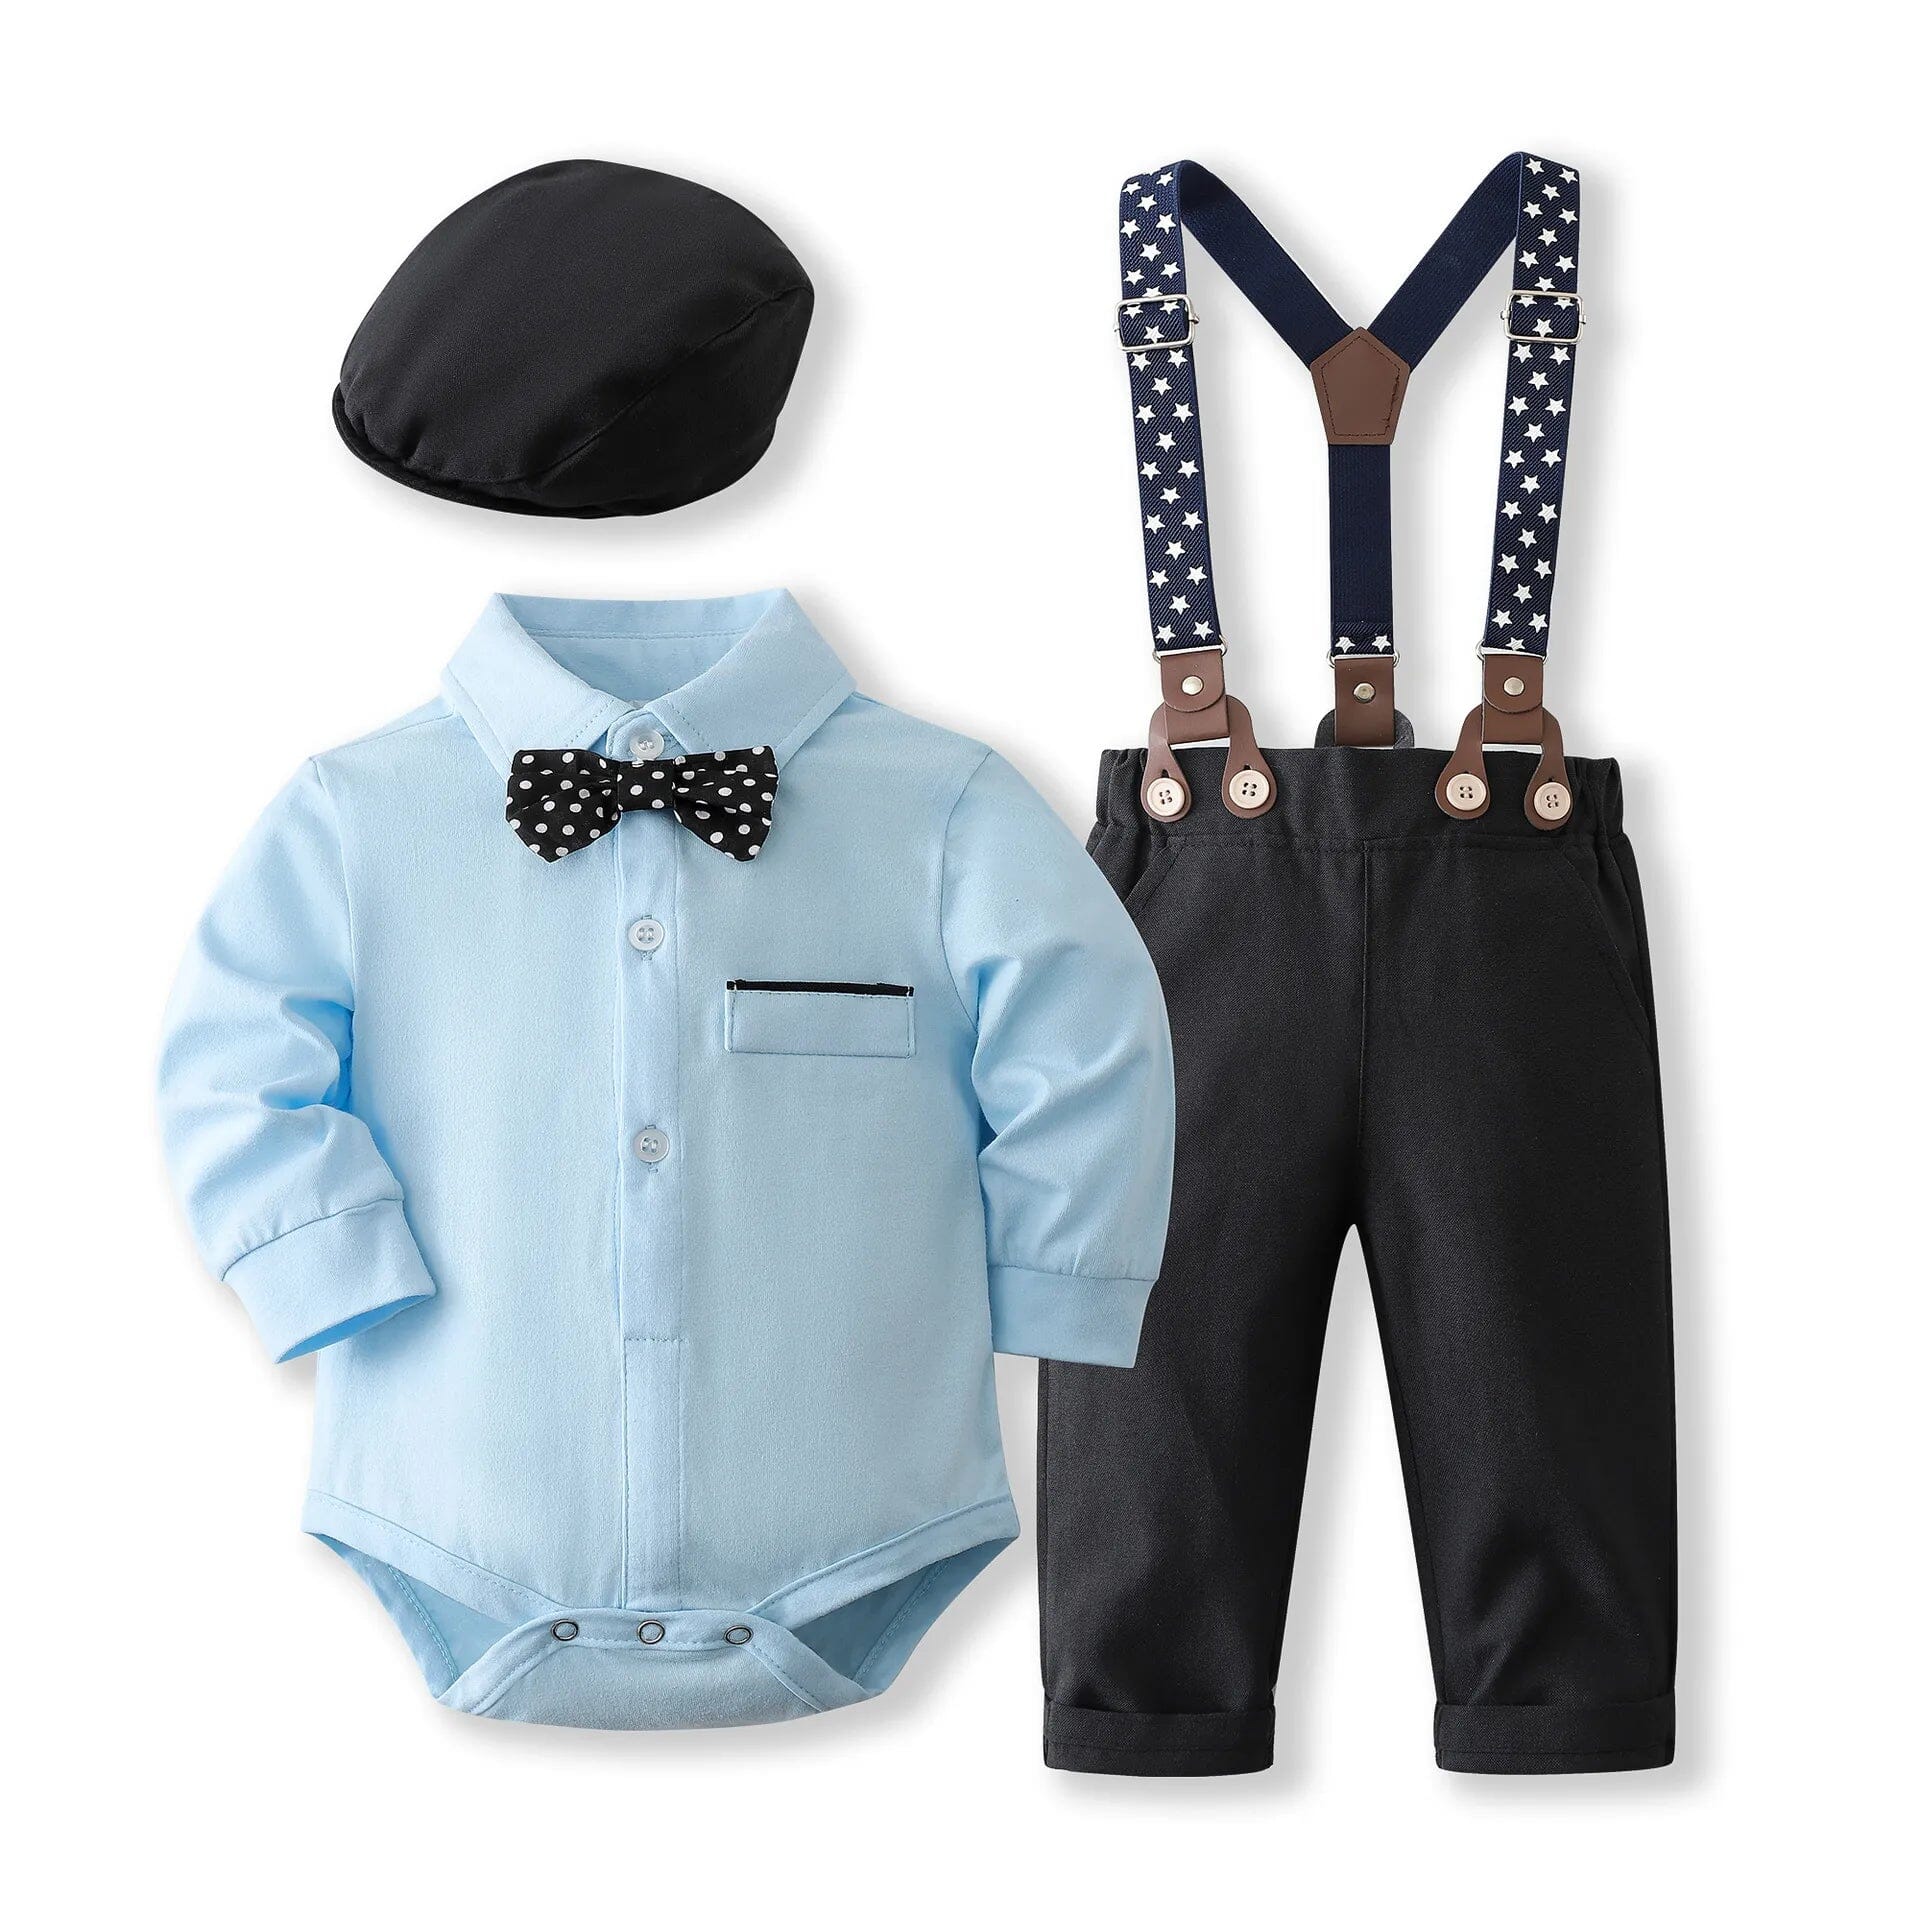 Newborn Baby Boy Clothes Set 0 to 3 6 9 12 Months 1st Birthday Party Infant Boys Sets Clothing Outfit Romper Shirts Pants Suit Baby Bubble Store Blue China 0-3M